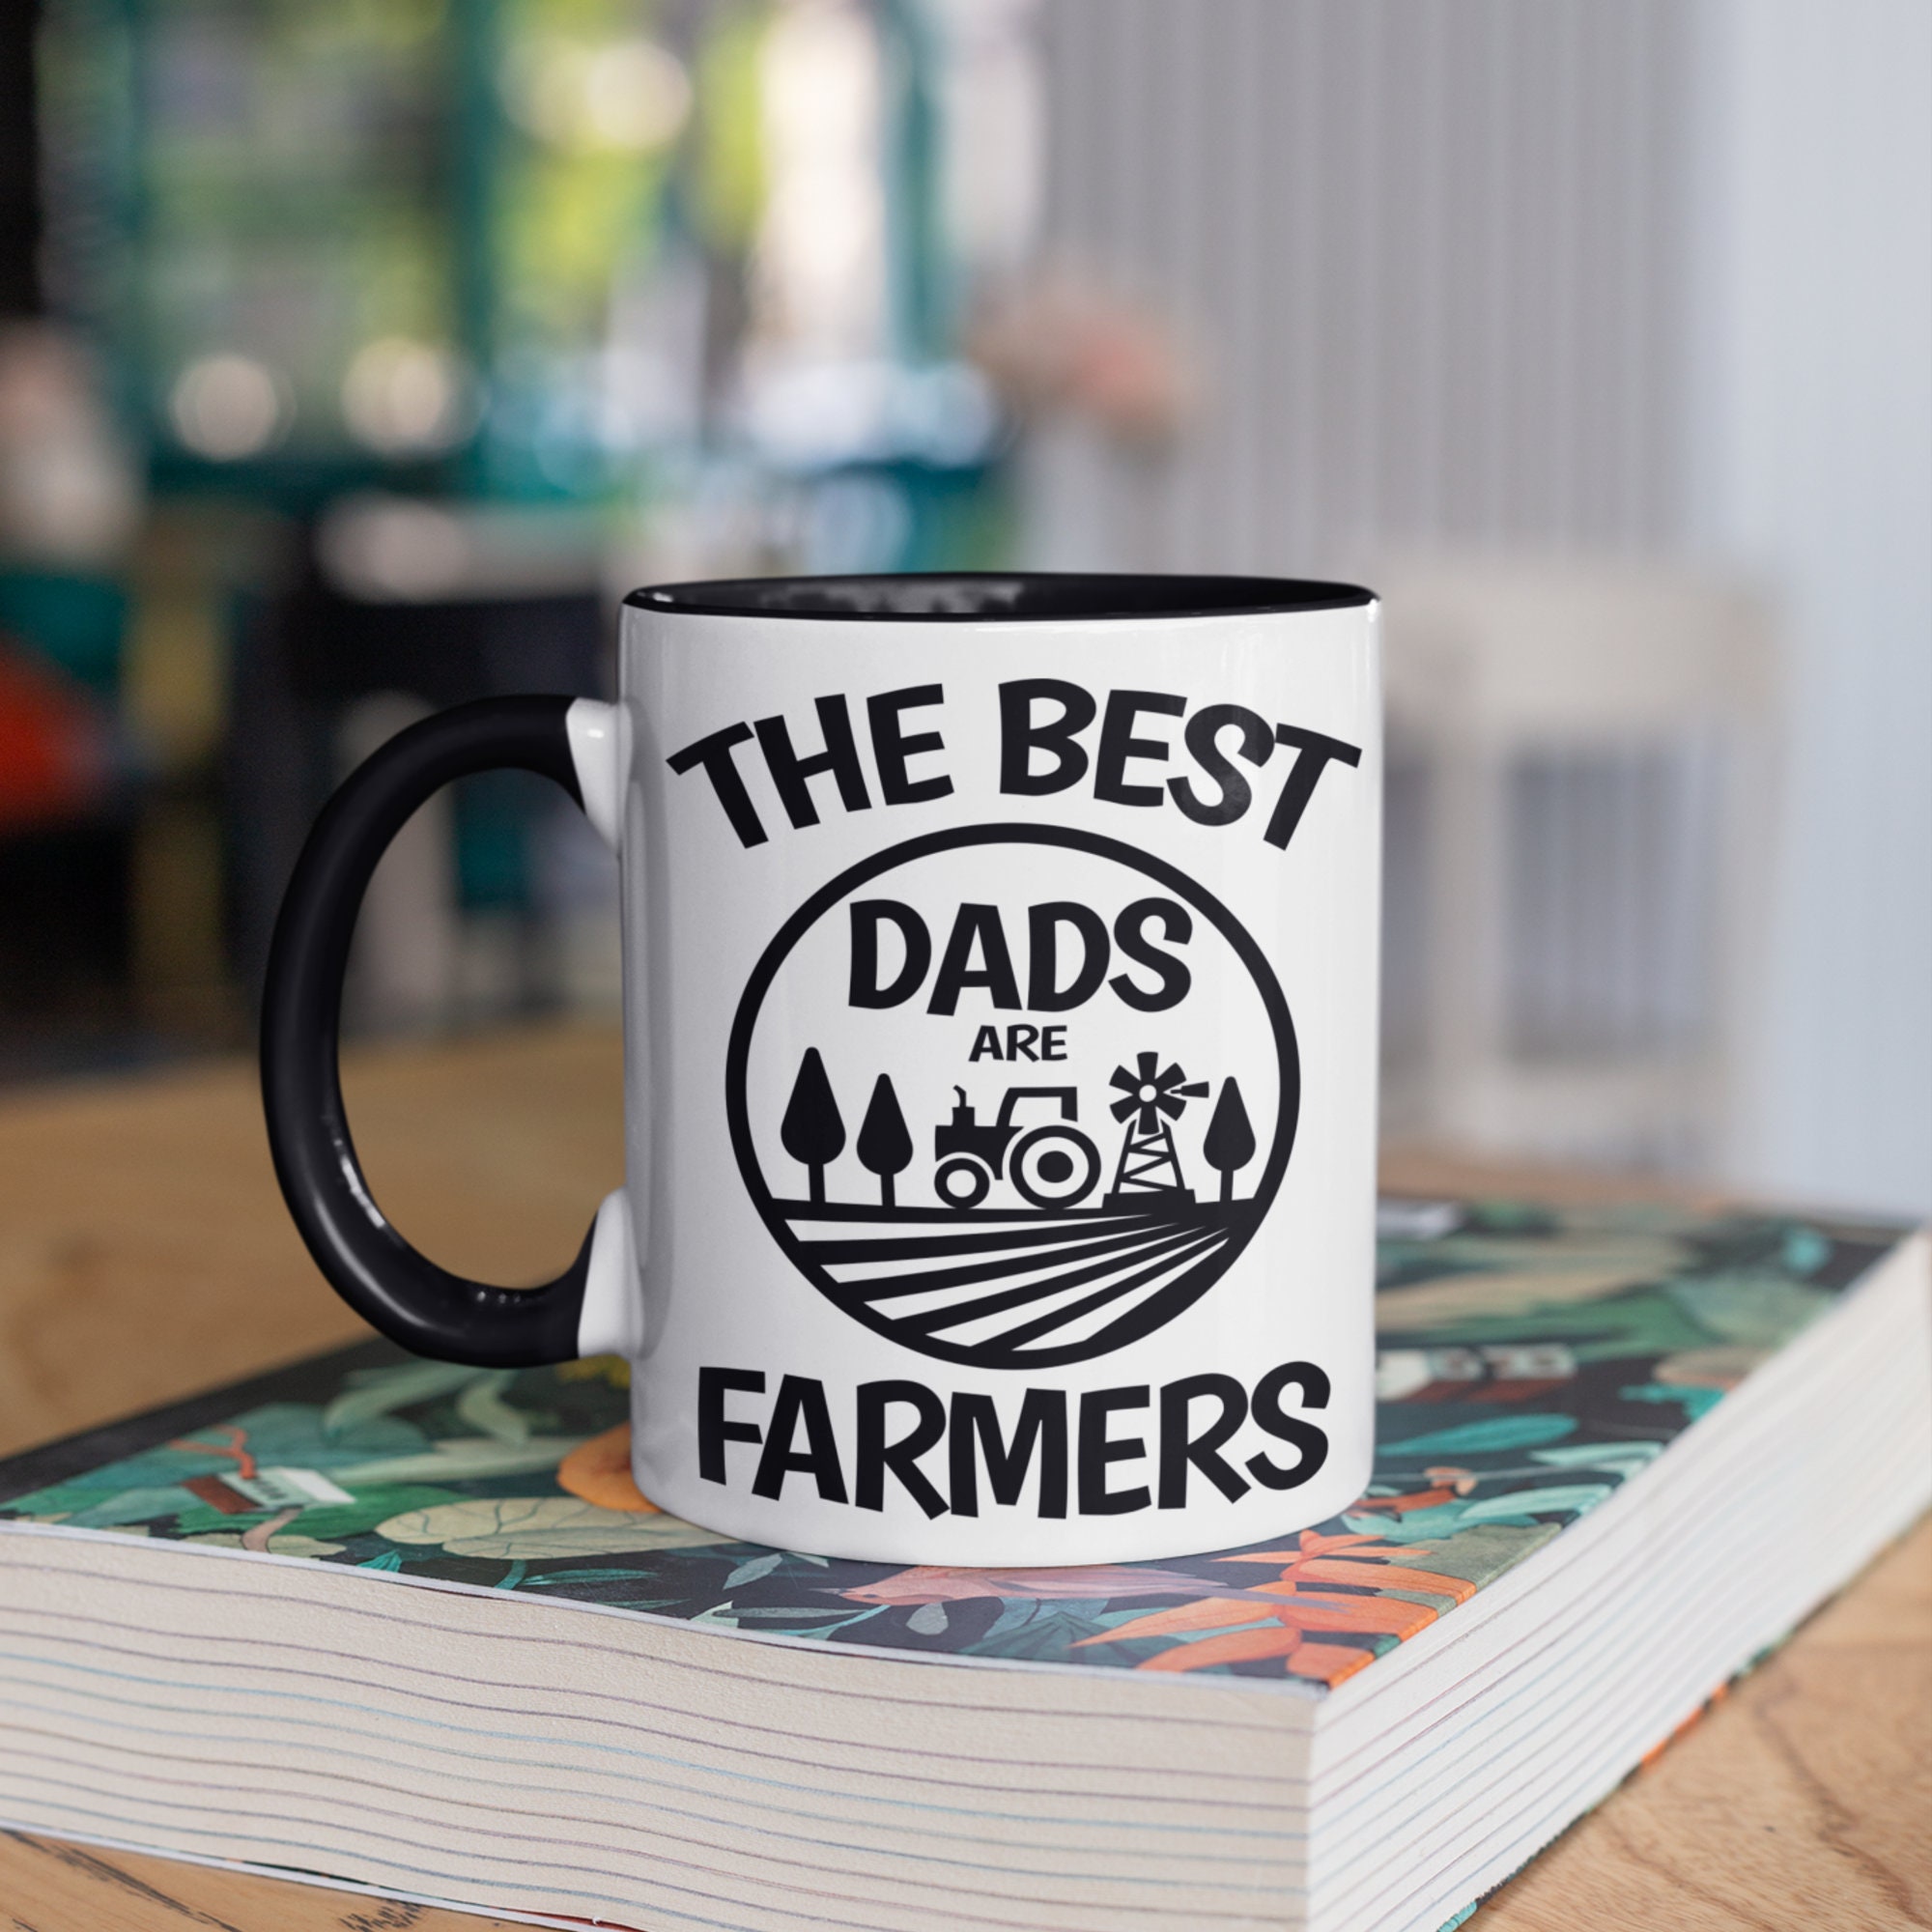 Dad Of Girls – Engraved Stainless Cup, Travel Mug For Dad, Gift For Him –  3C Etching LTD